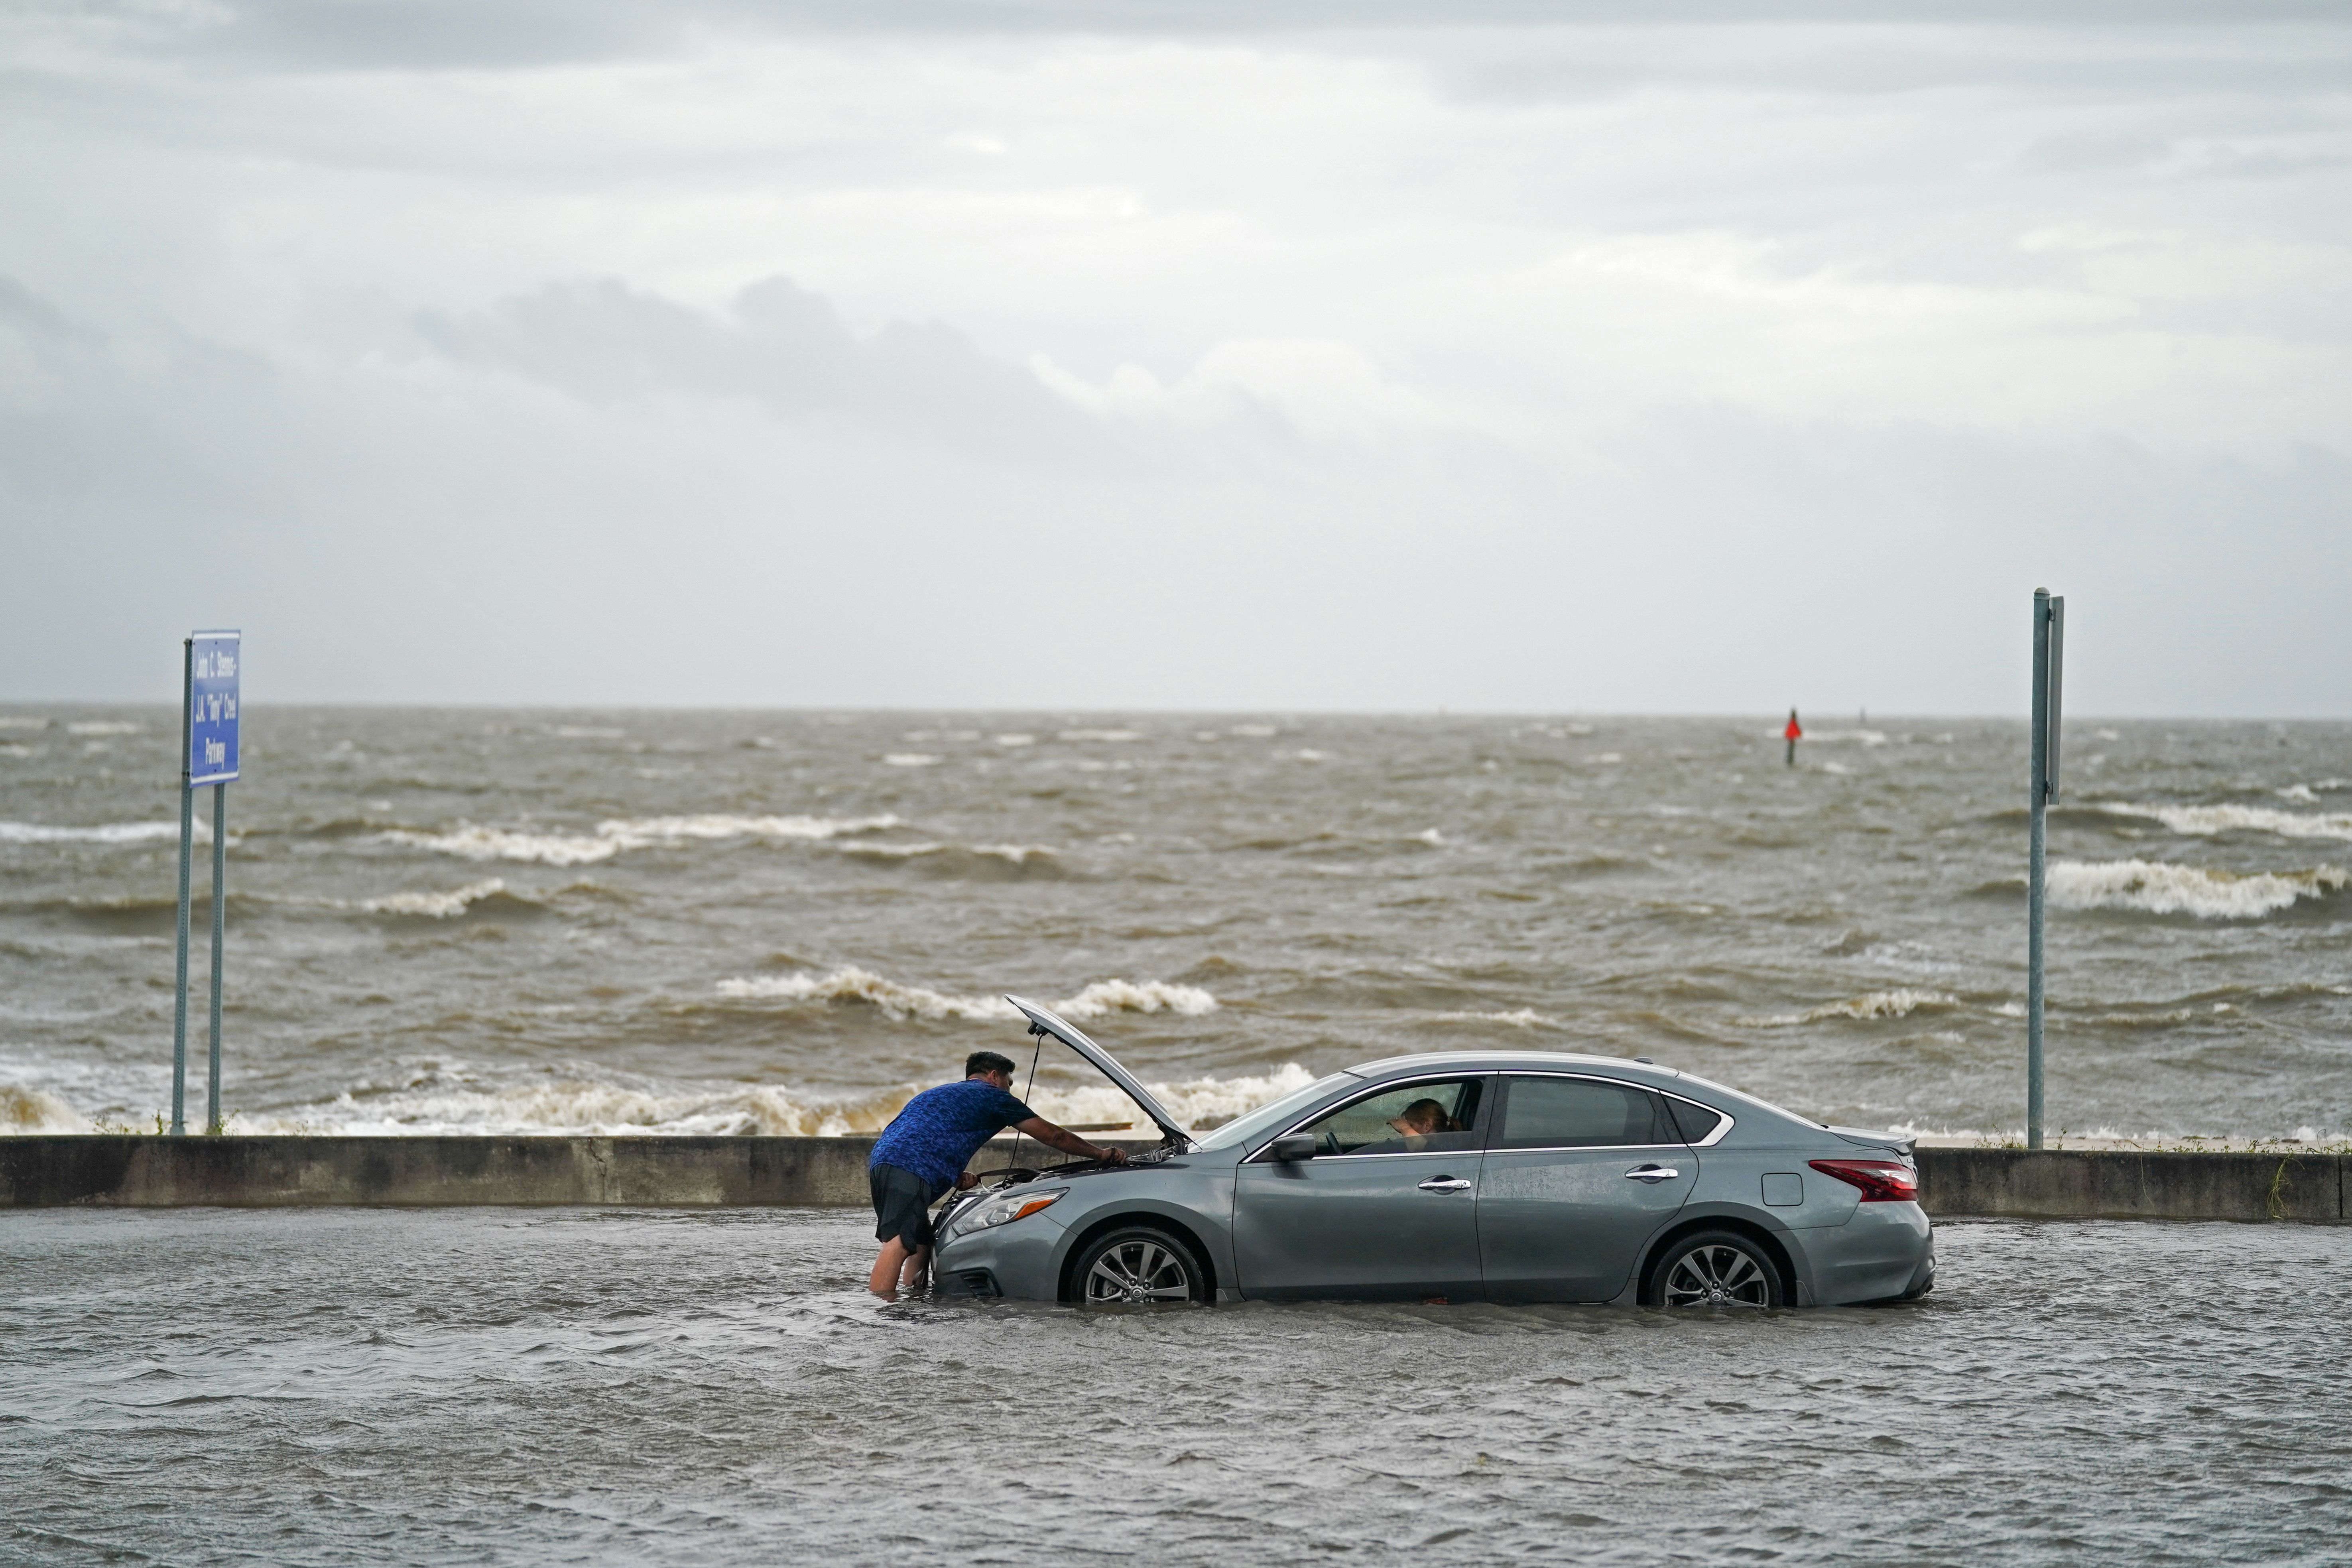 A man helps a stranded motorist in floodwaters on Beach Blvd. on August 30, 2021 in Biloxi, Mississippi. 